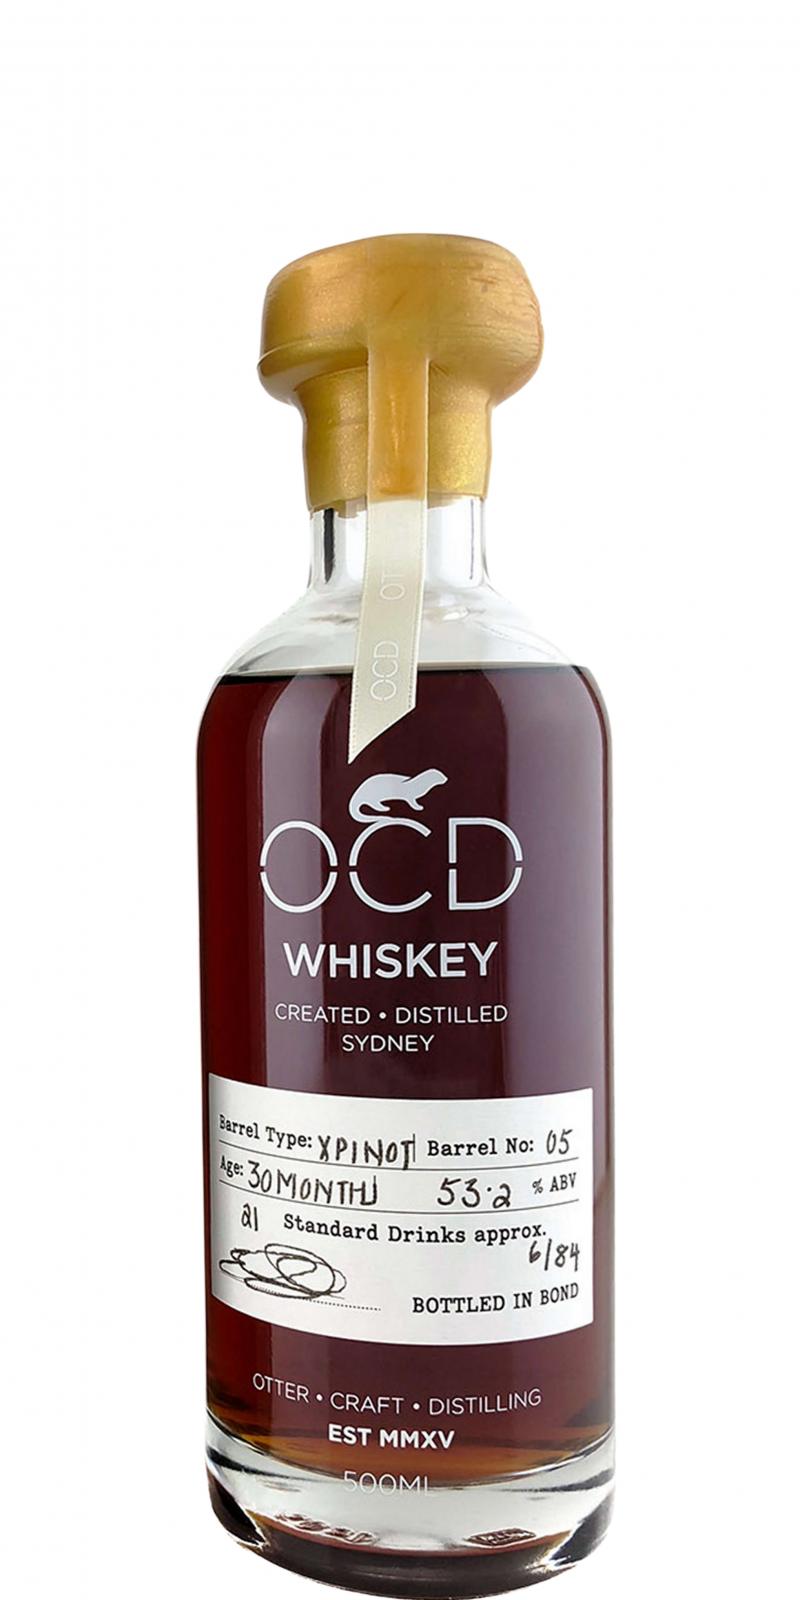 Ocd Whisky 5th Release Ex-Pinot 50 litres 05 53.2% 500ml